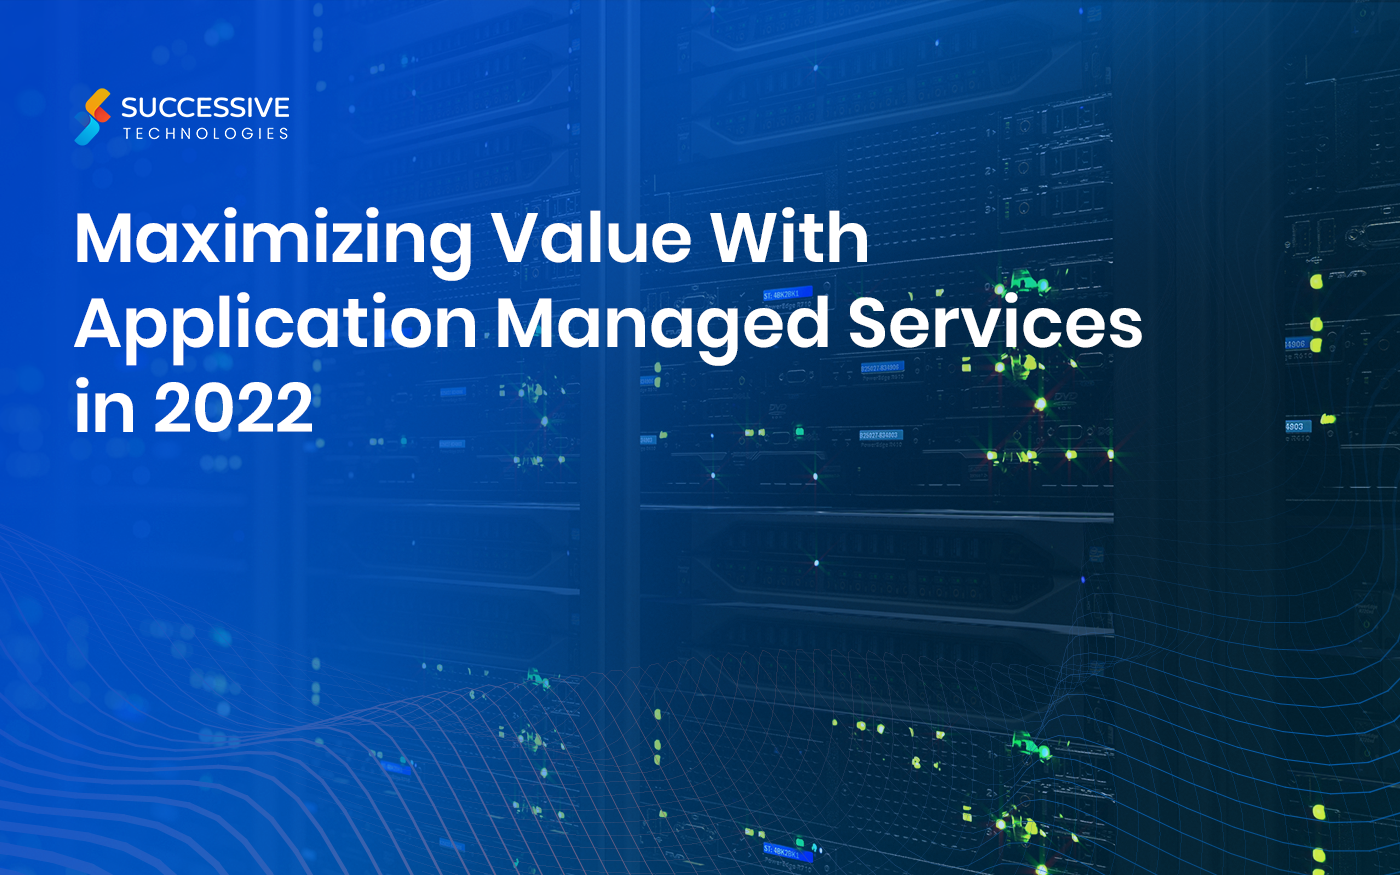 Maximizing Value With Application Managed Services in 2022